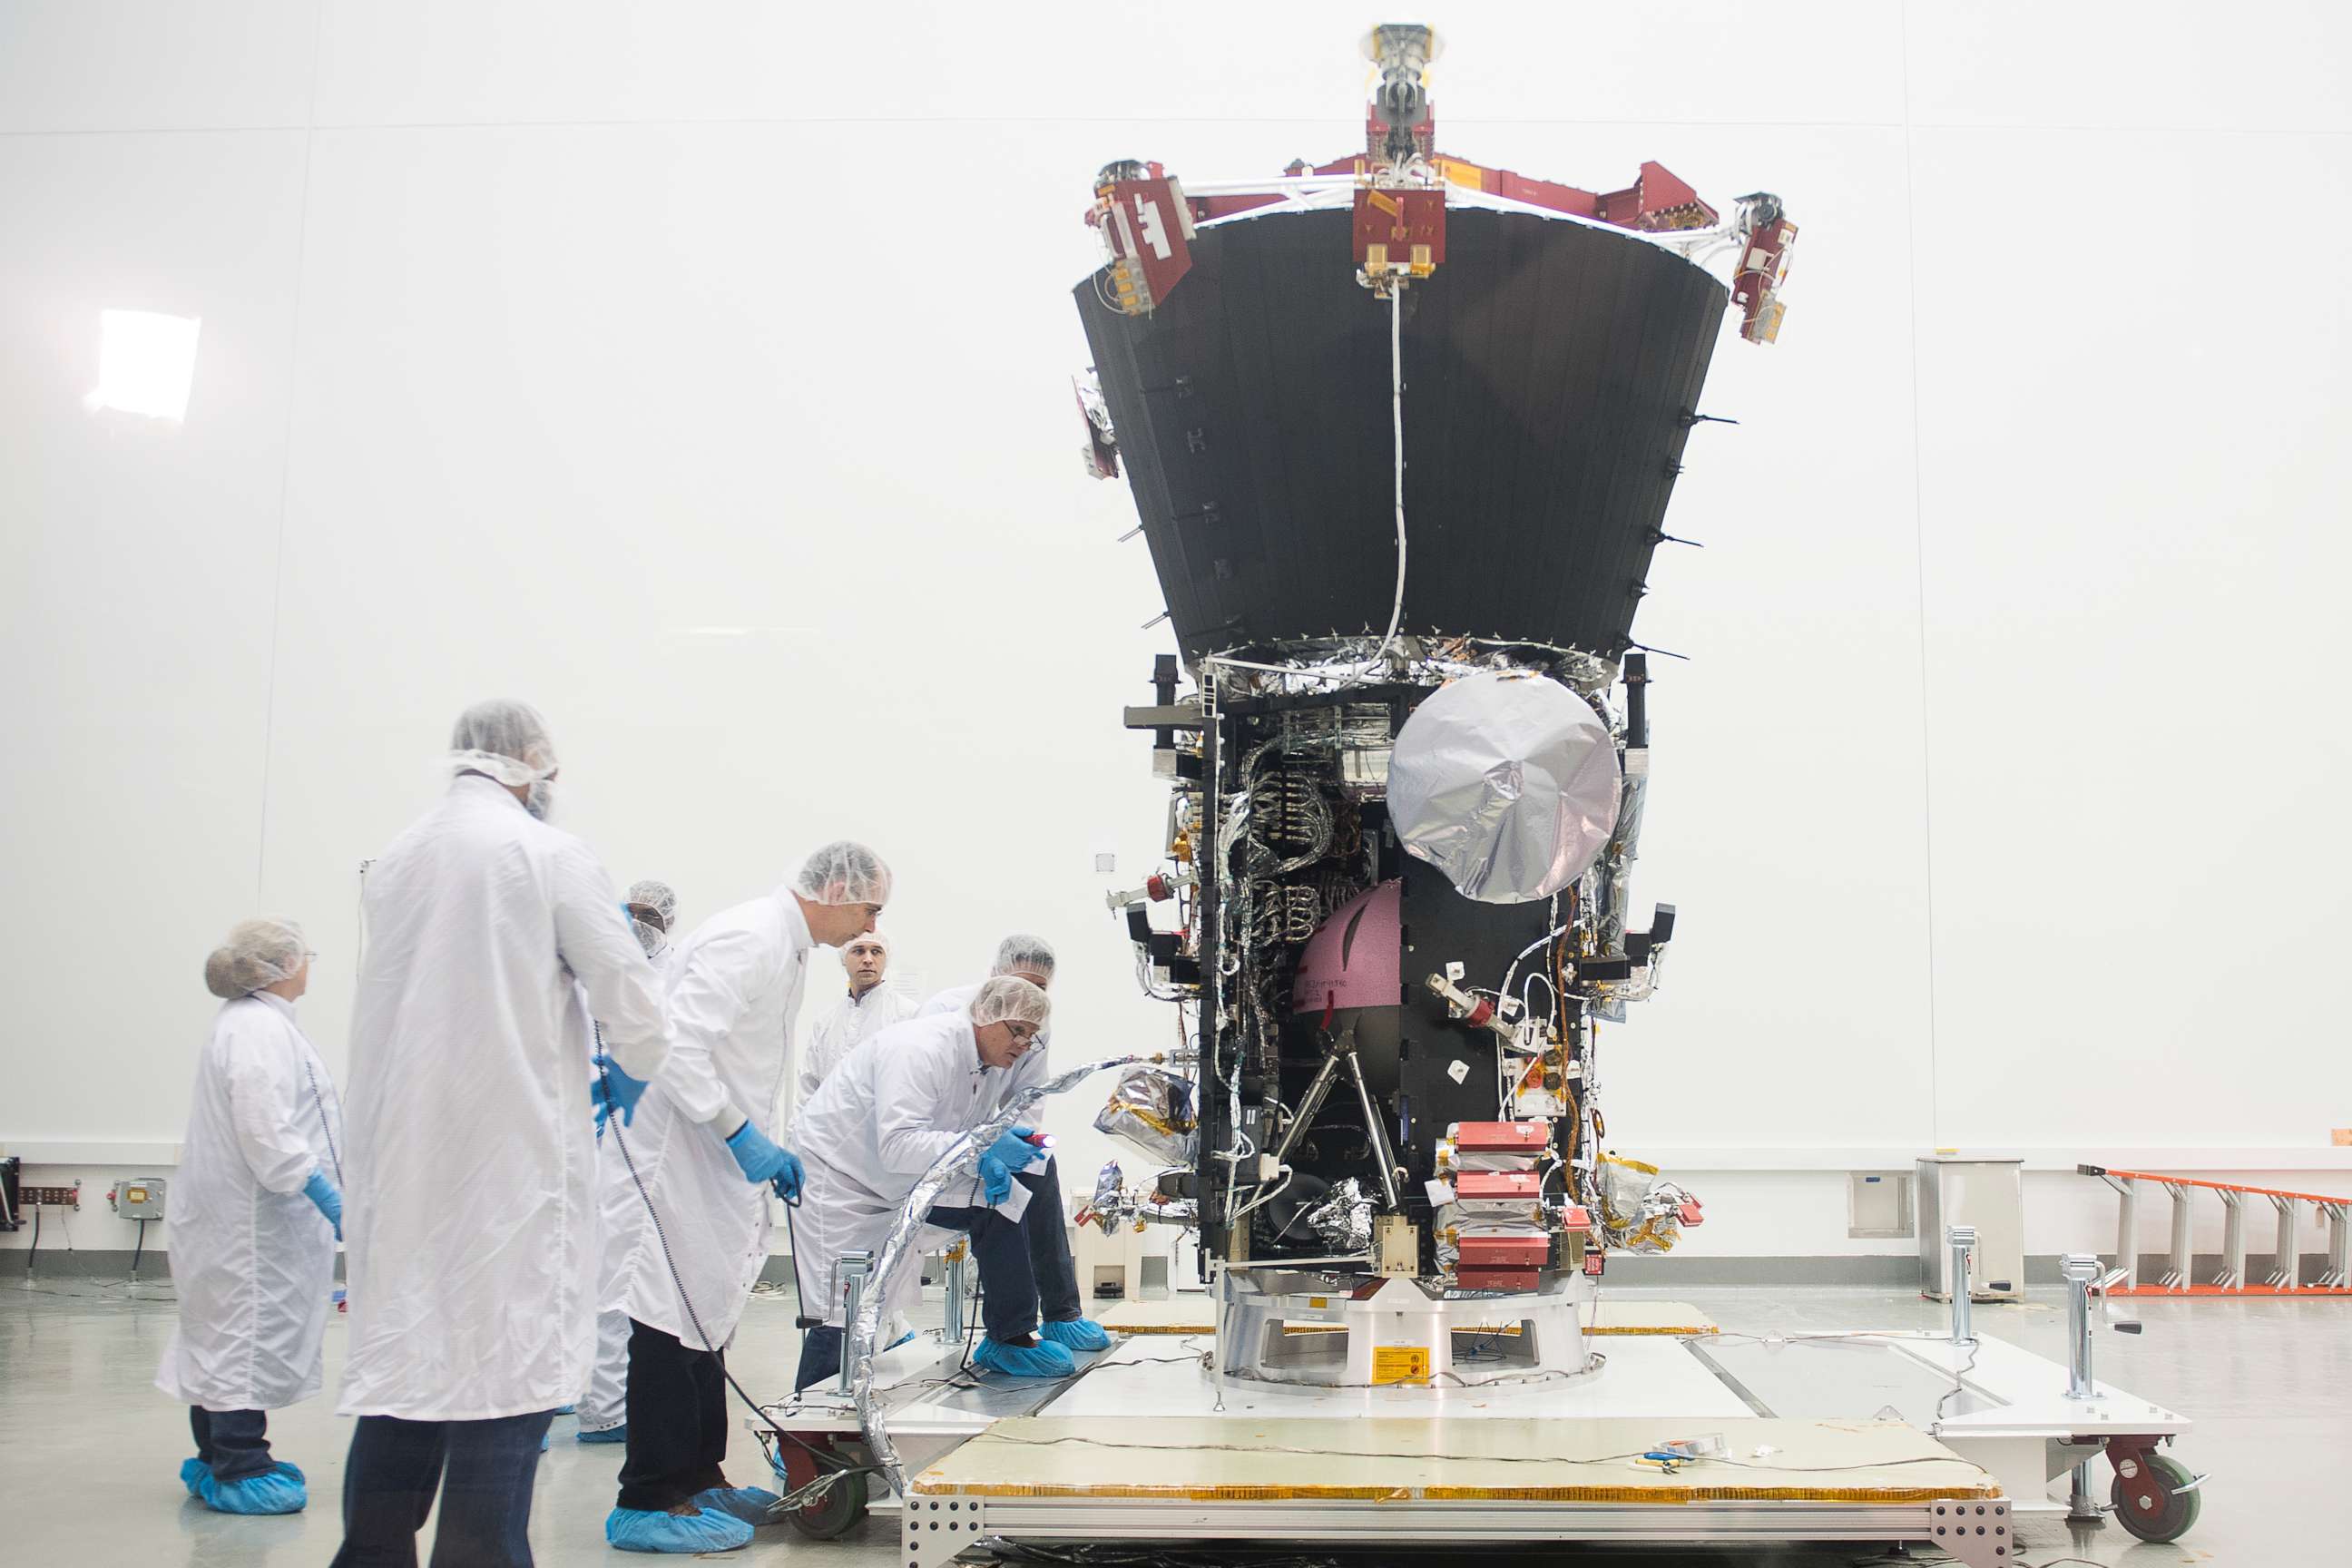 PHOTO: Engineers examine the Parker Solar Probe during a media preview at NASA Goddard Space Flight Center in Greenbelt, Md., March 28, 2018.